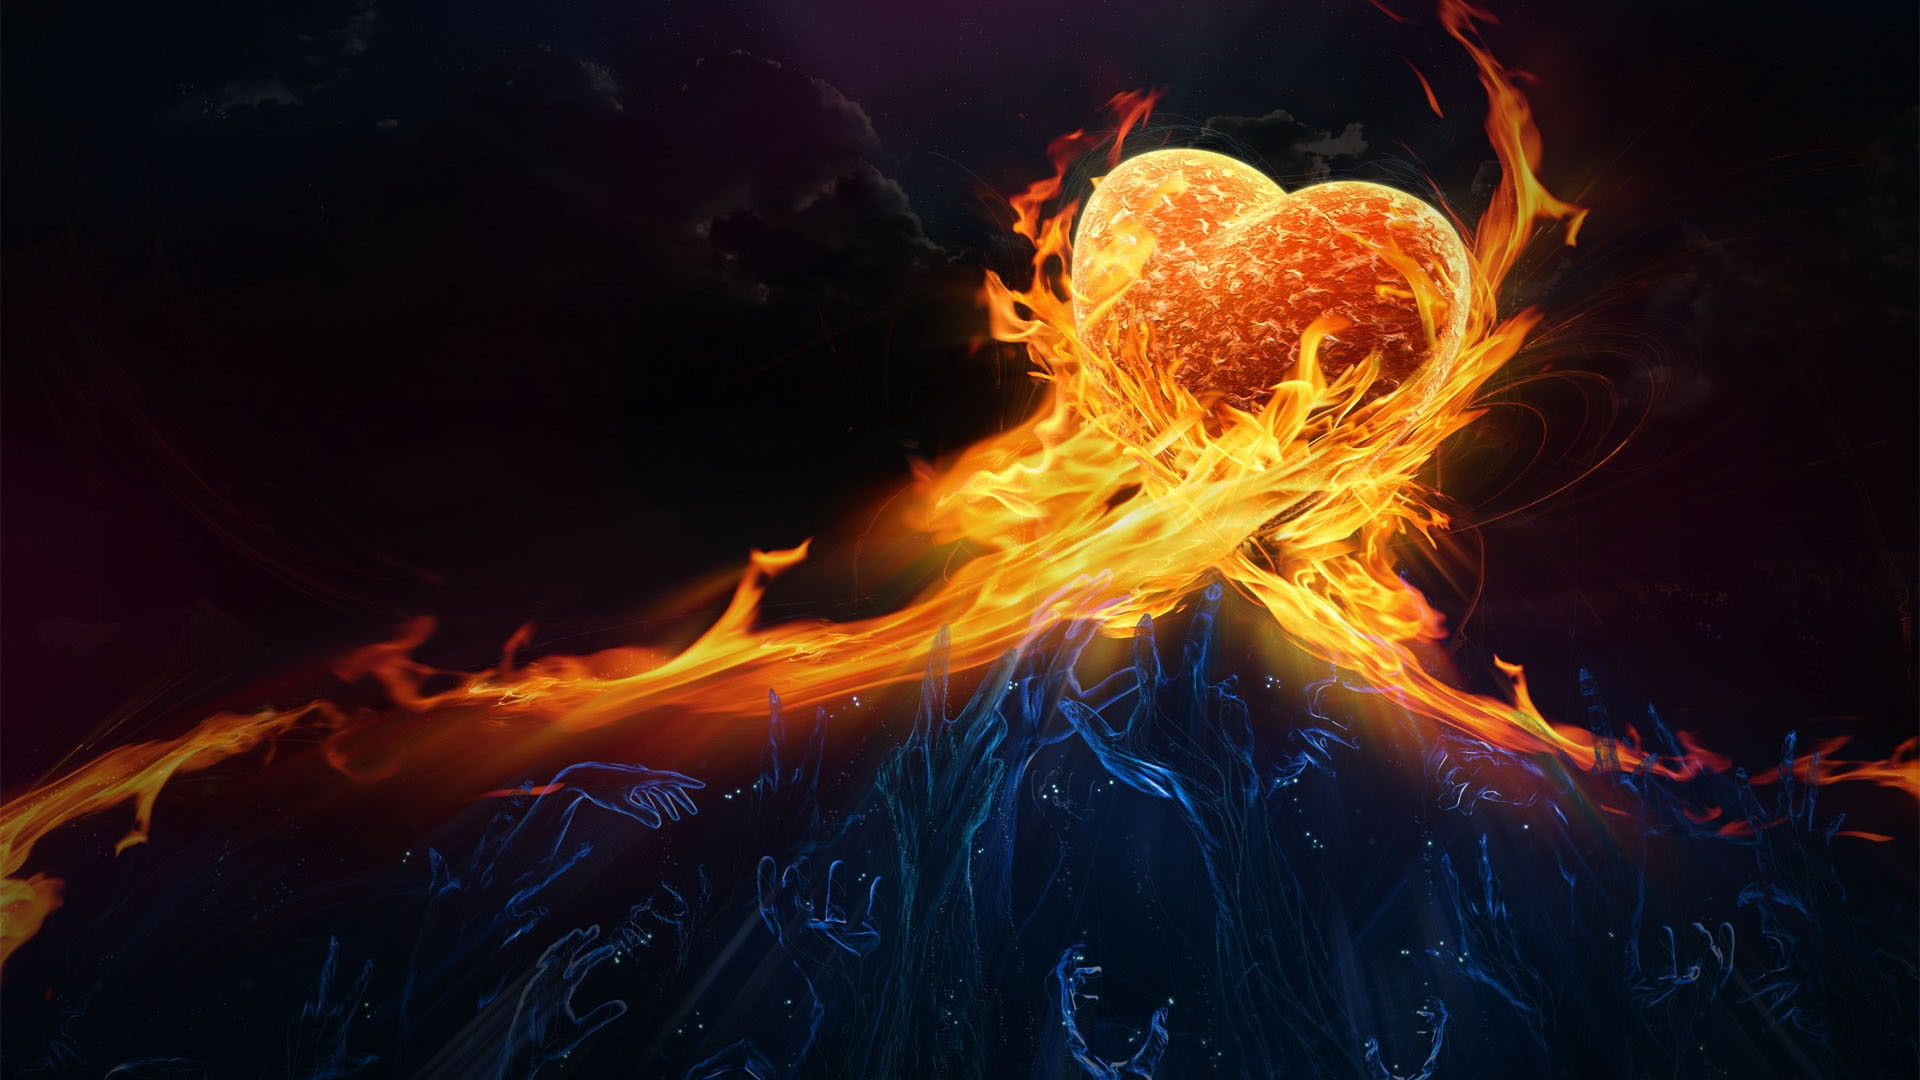 1920x1080  Cool Fire Dragon Wallpaper - Viewing Gallery